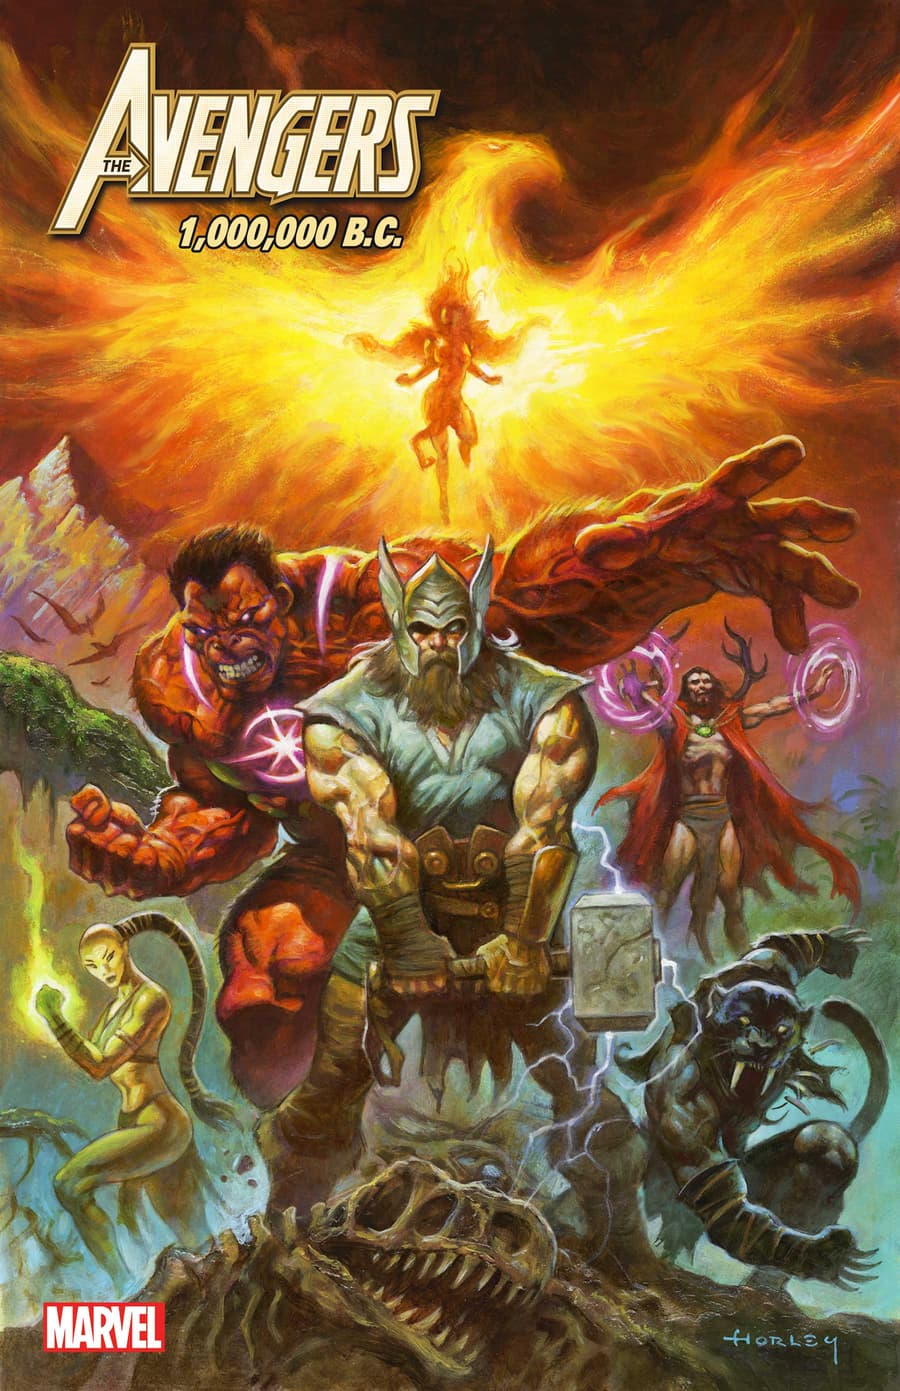 AVENGERS: 1,000,000 B.C. #1 variant cover by Alex Horley